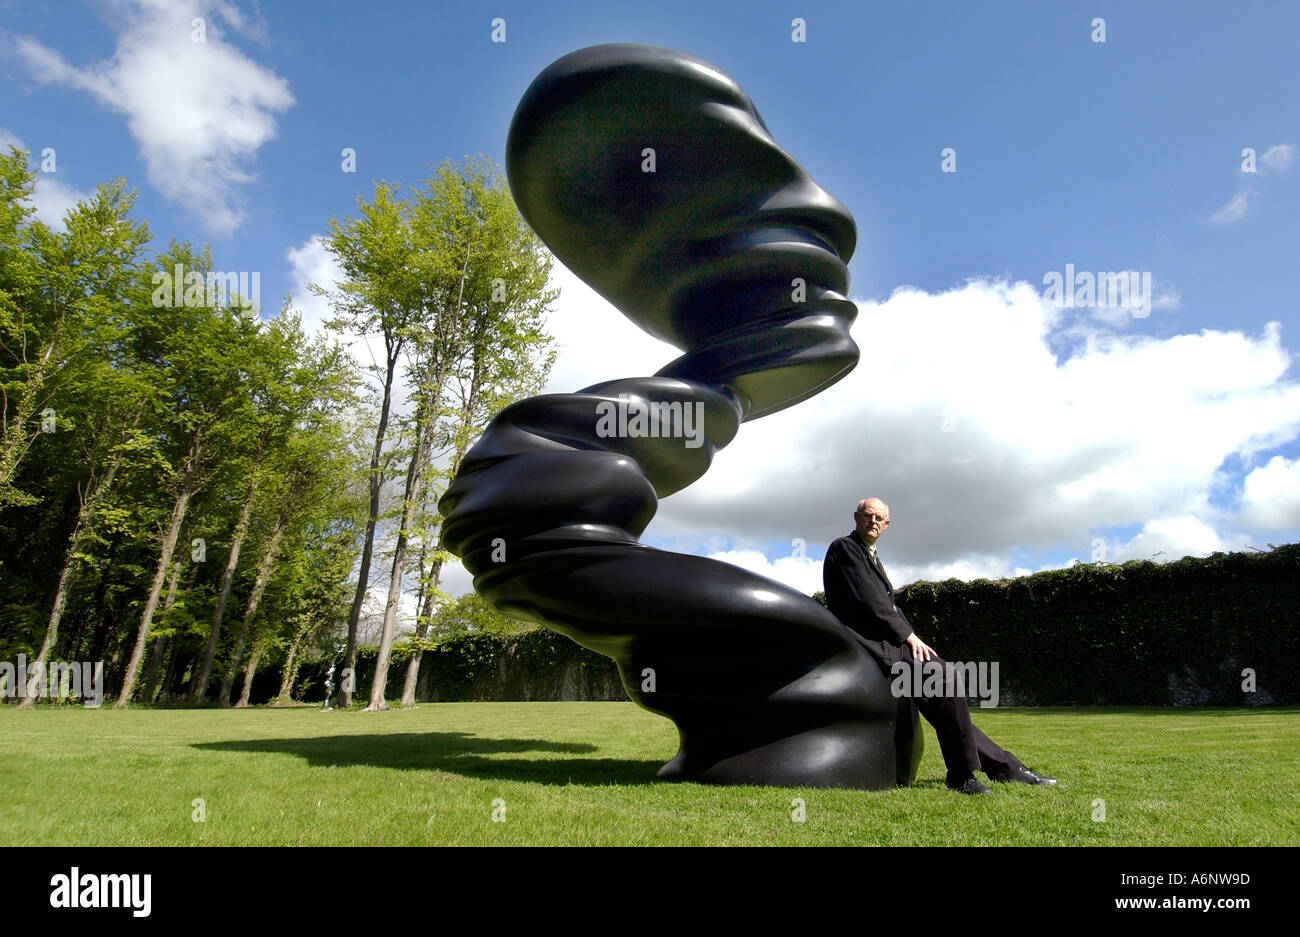 Tony Cragg sculptor and monumental new work Bent of Mind at Goodwood  sculpture park Stock Photo - Alamy